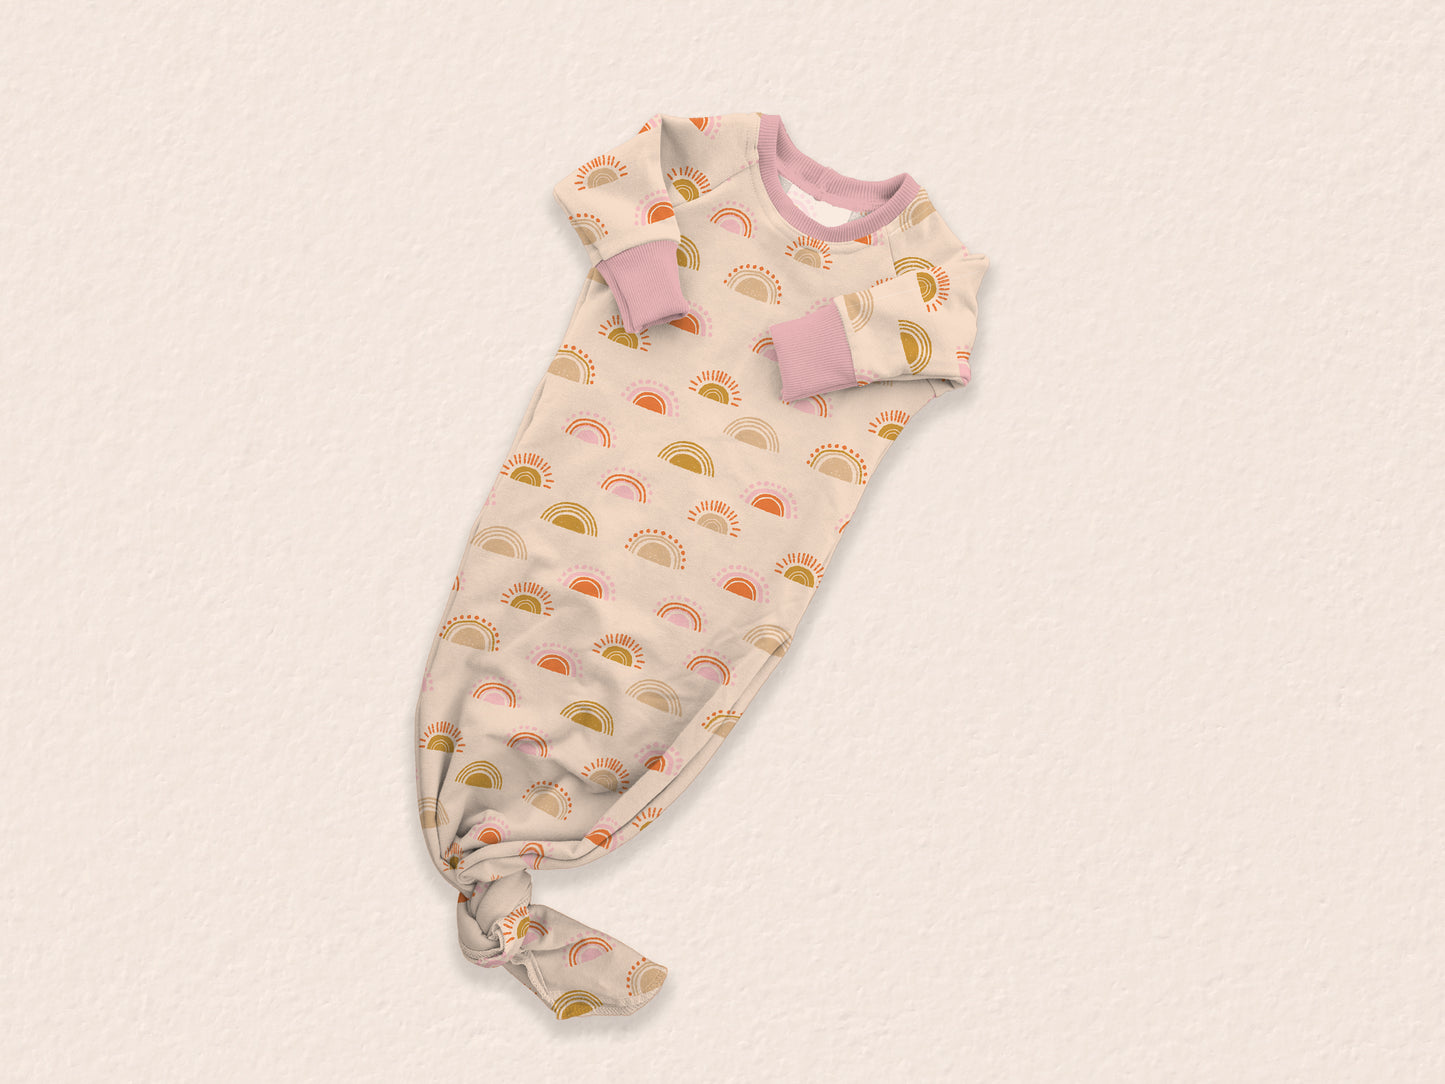 Knotted Baby Gown Mock Up, Realistic Clothing Mockups for Photoshop and Procreate